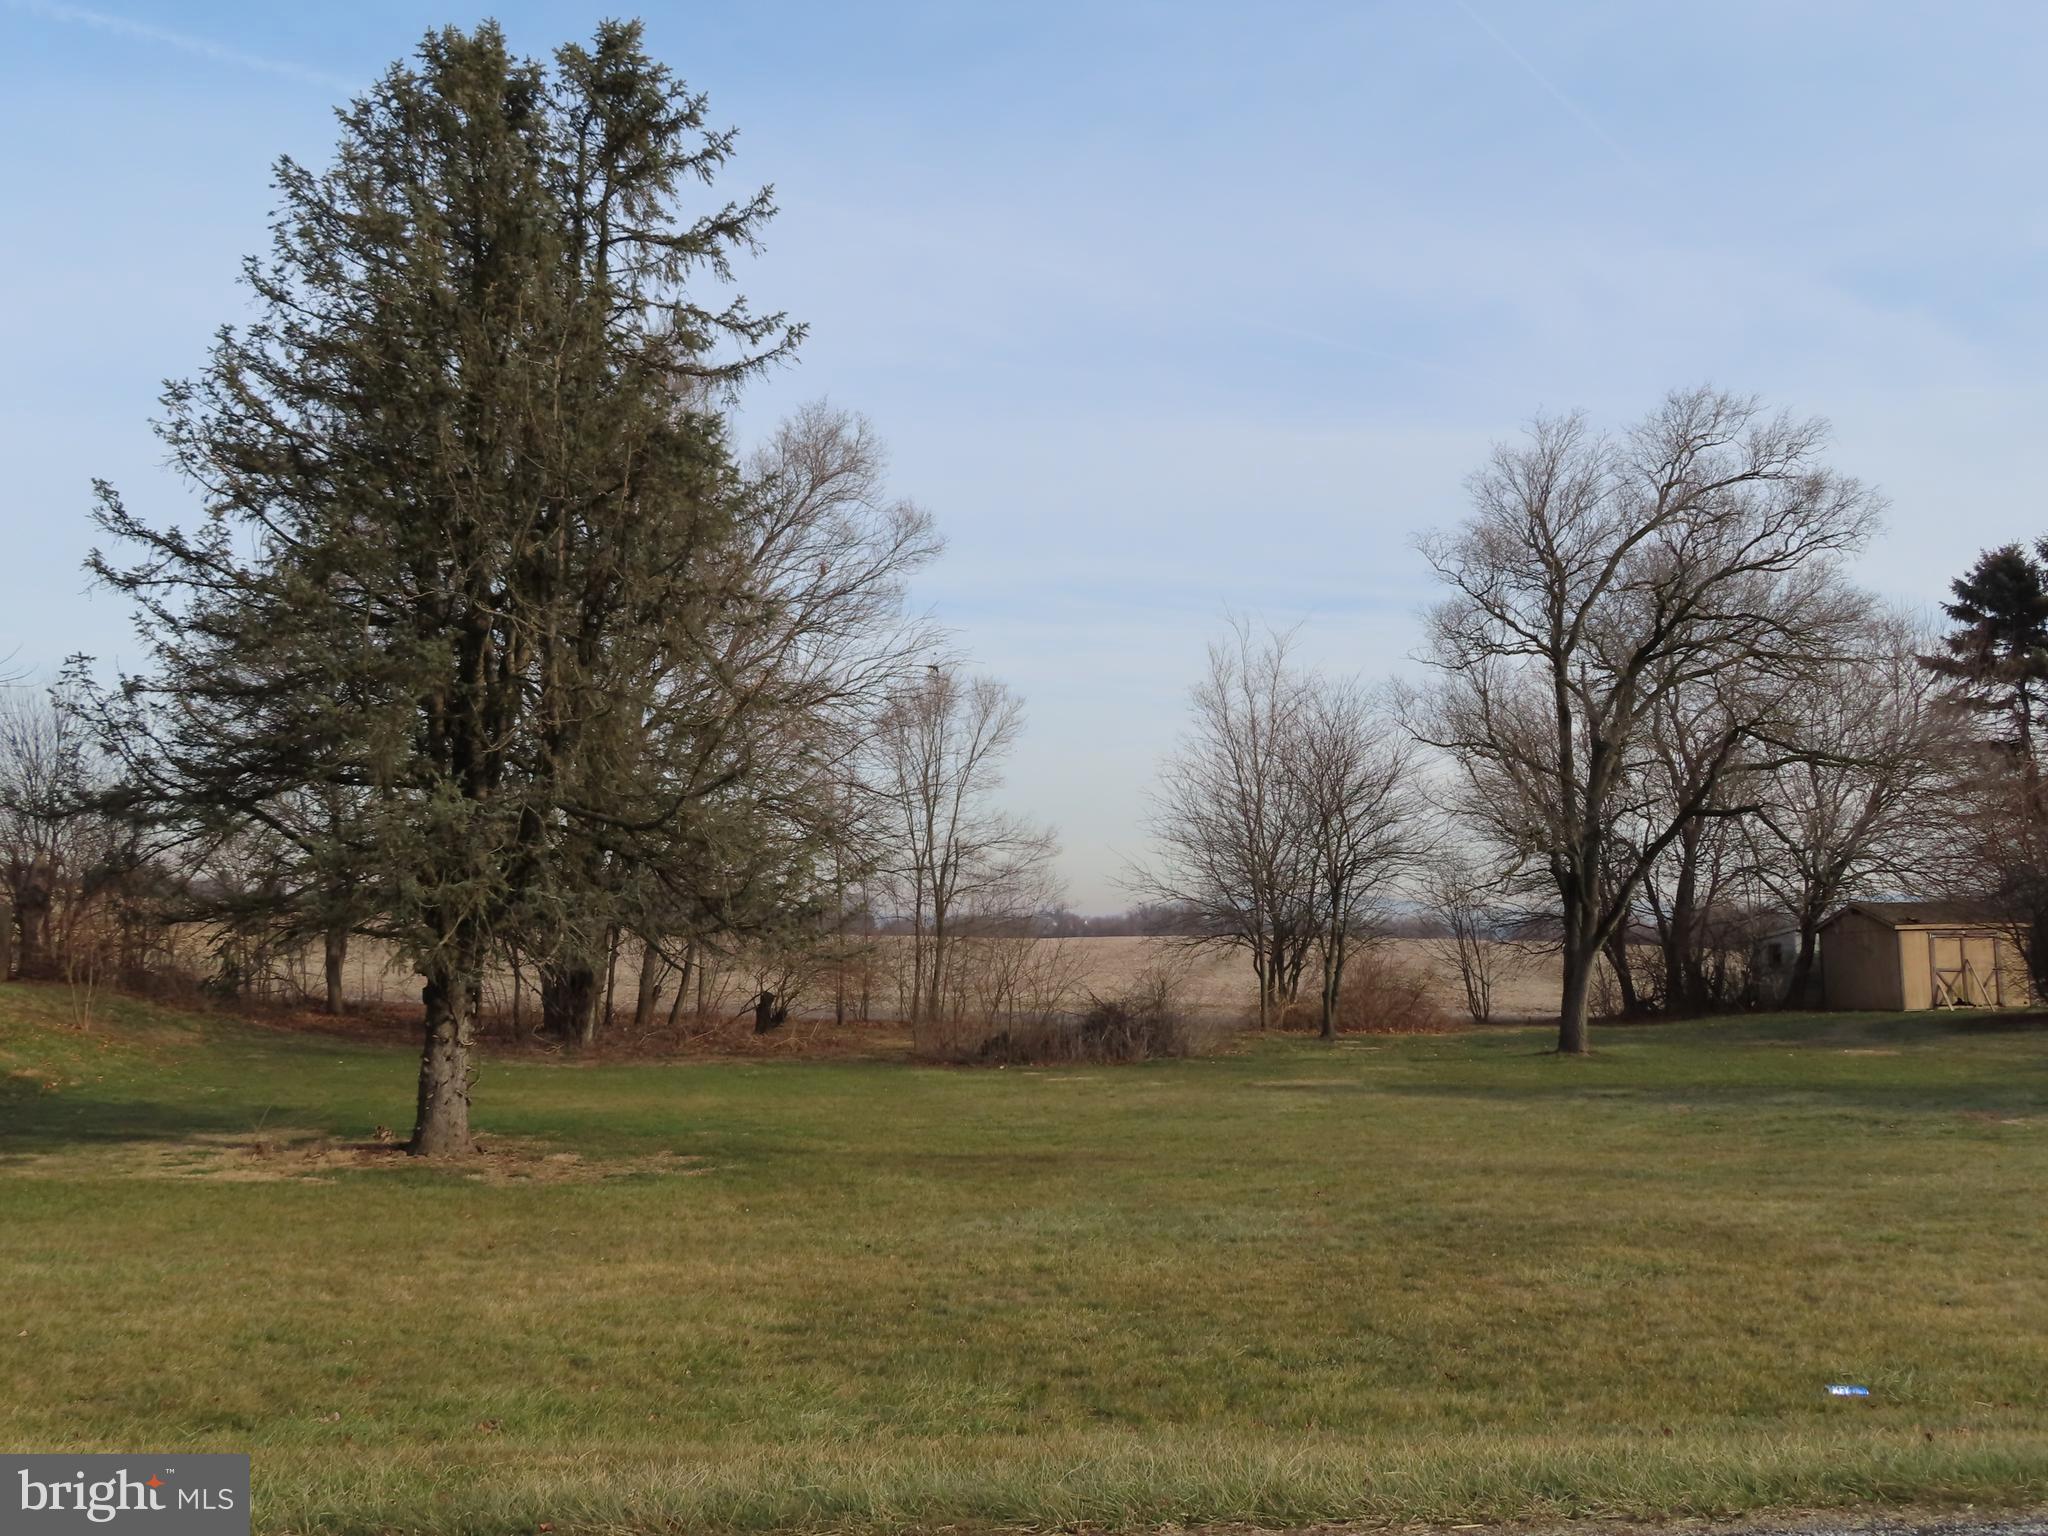 a view of a field with tree